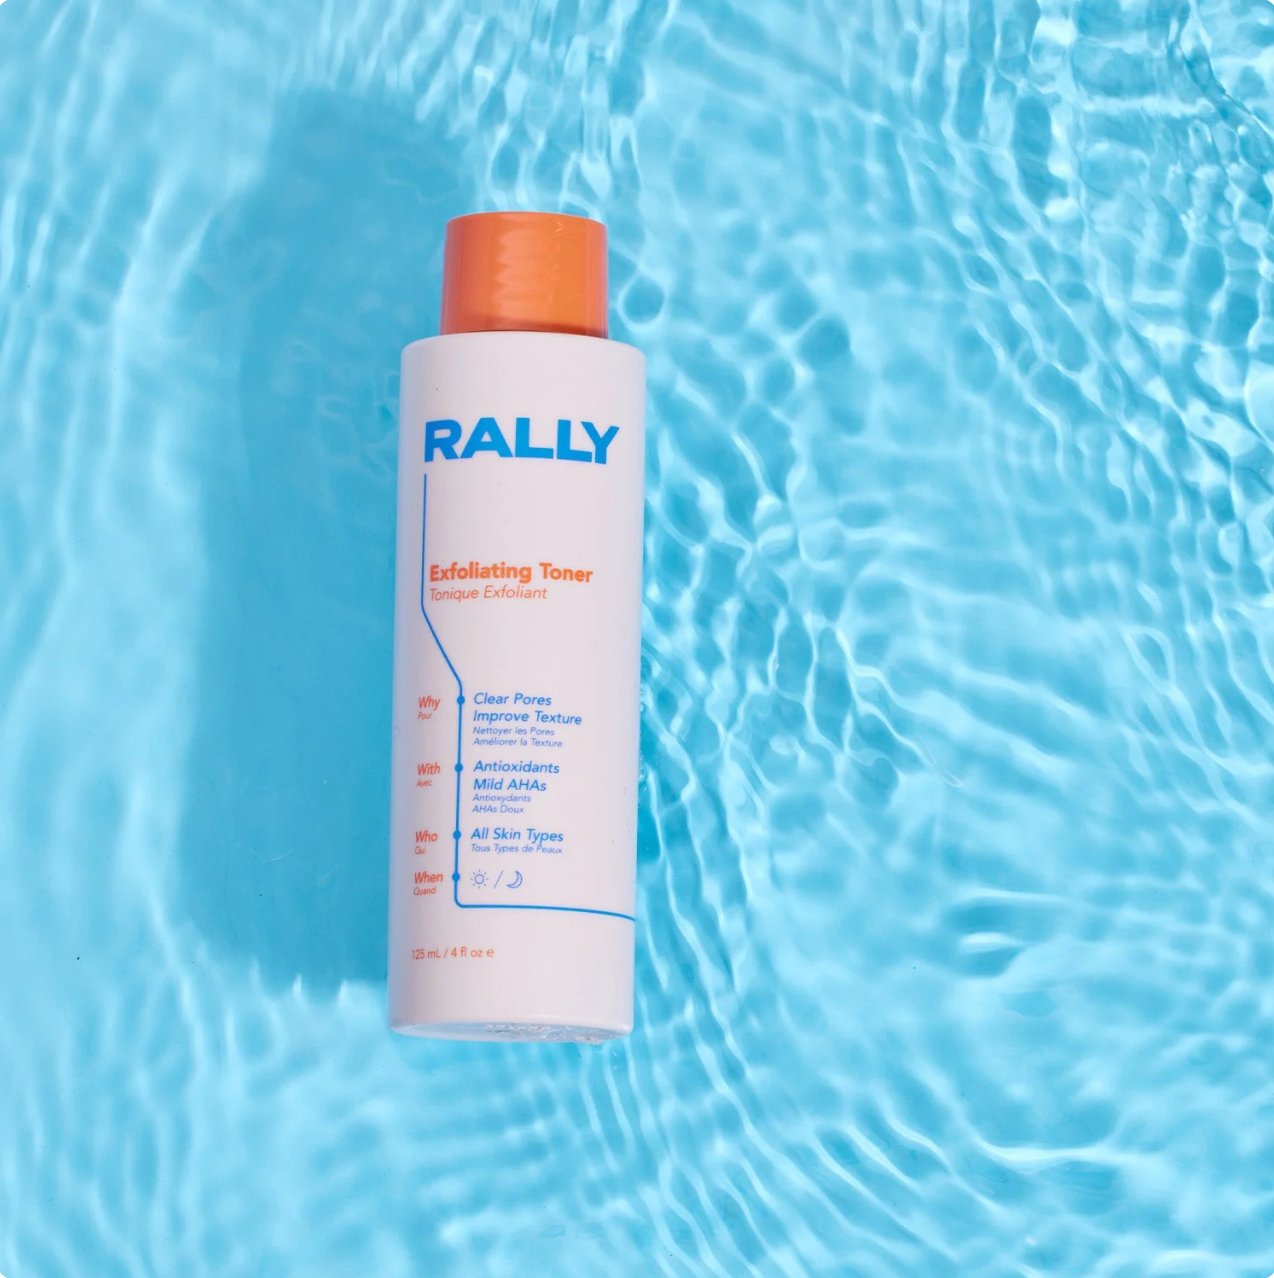 What is An Exfoliating Toner, and Does My Teen Need It? - RALLY